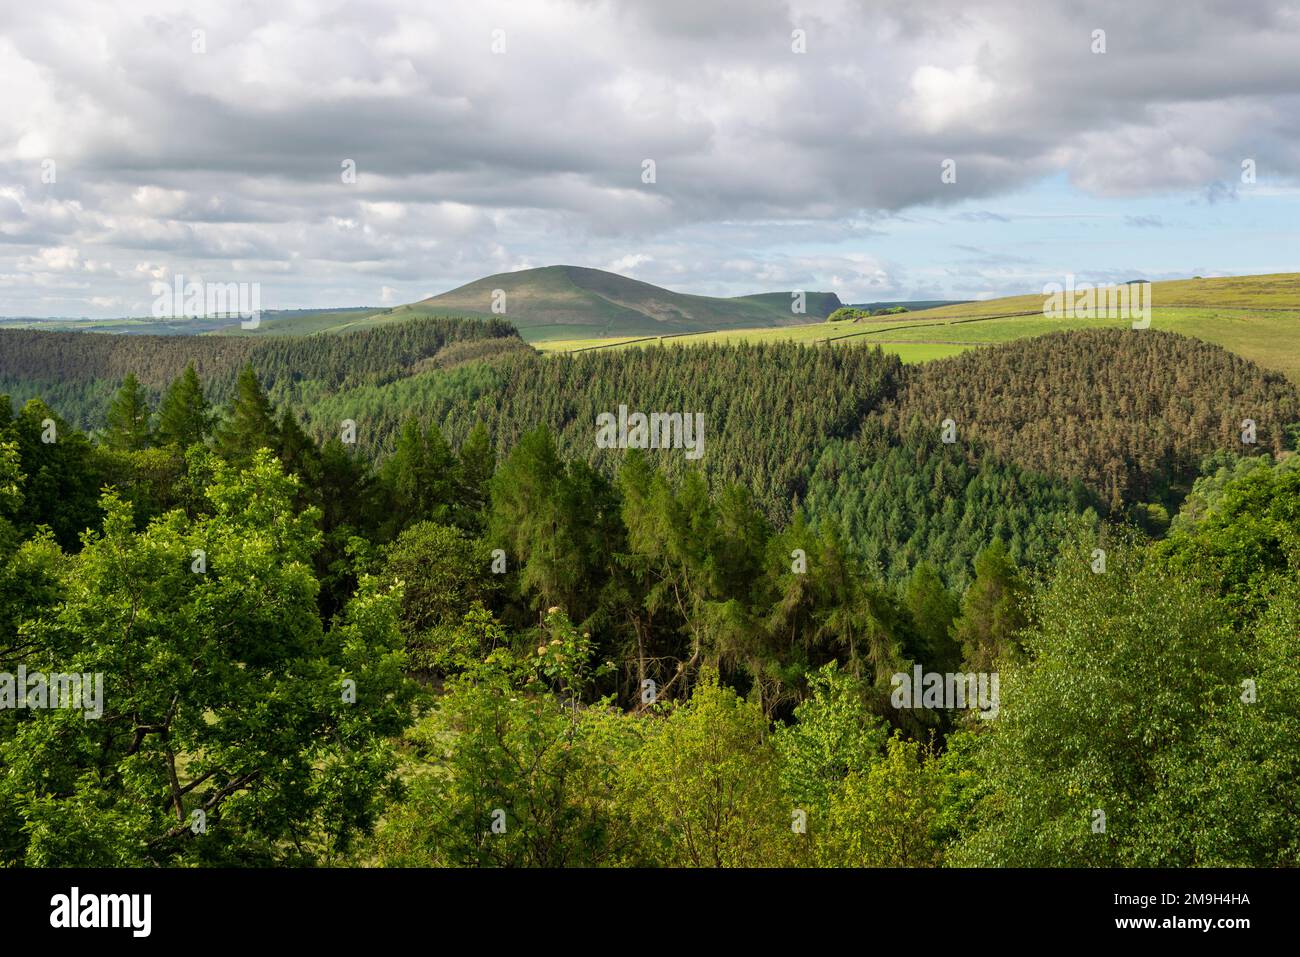 High in the Derbyshire hills above the Woodlands Valley and Snake Pass, Lose Hill in the background. Peak District national park, England. Stock Photo